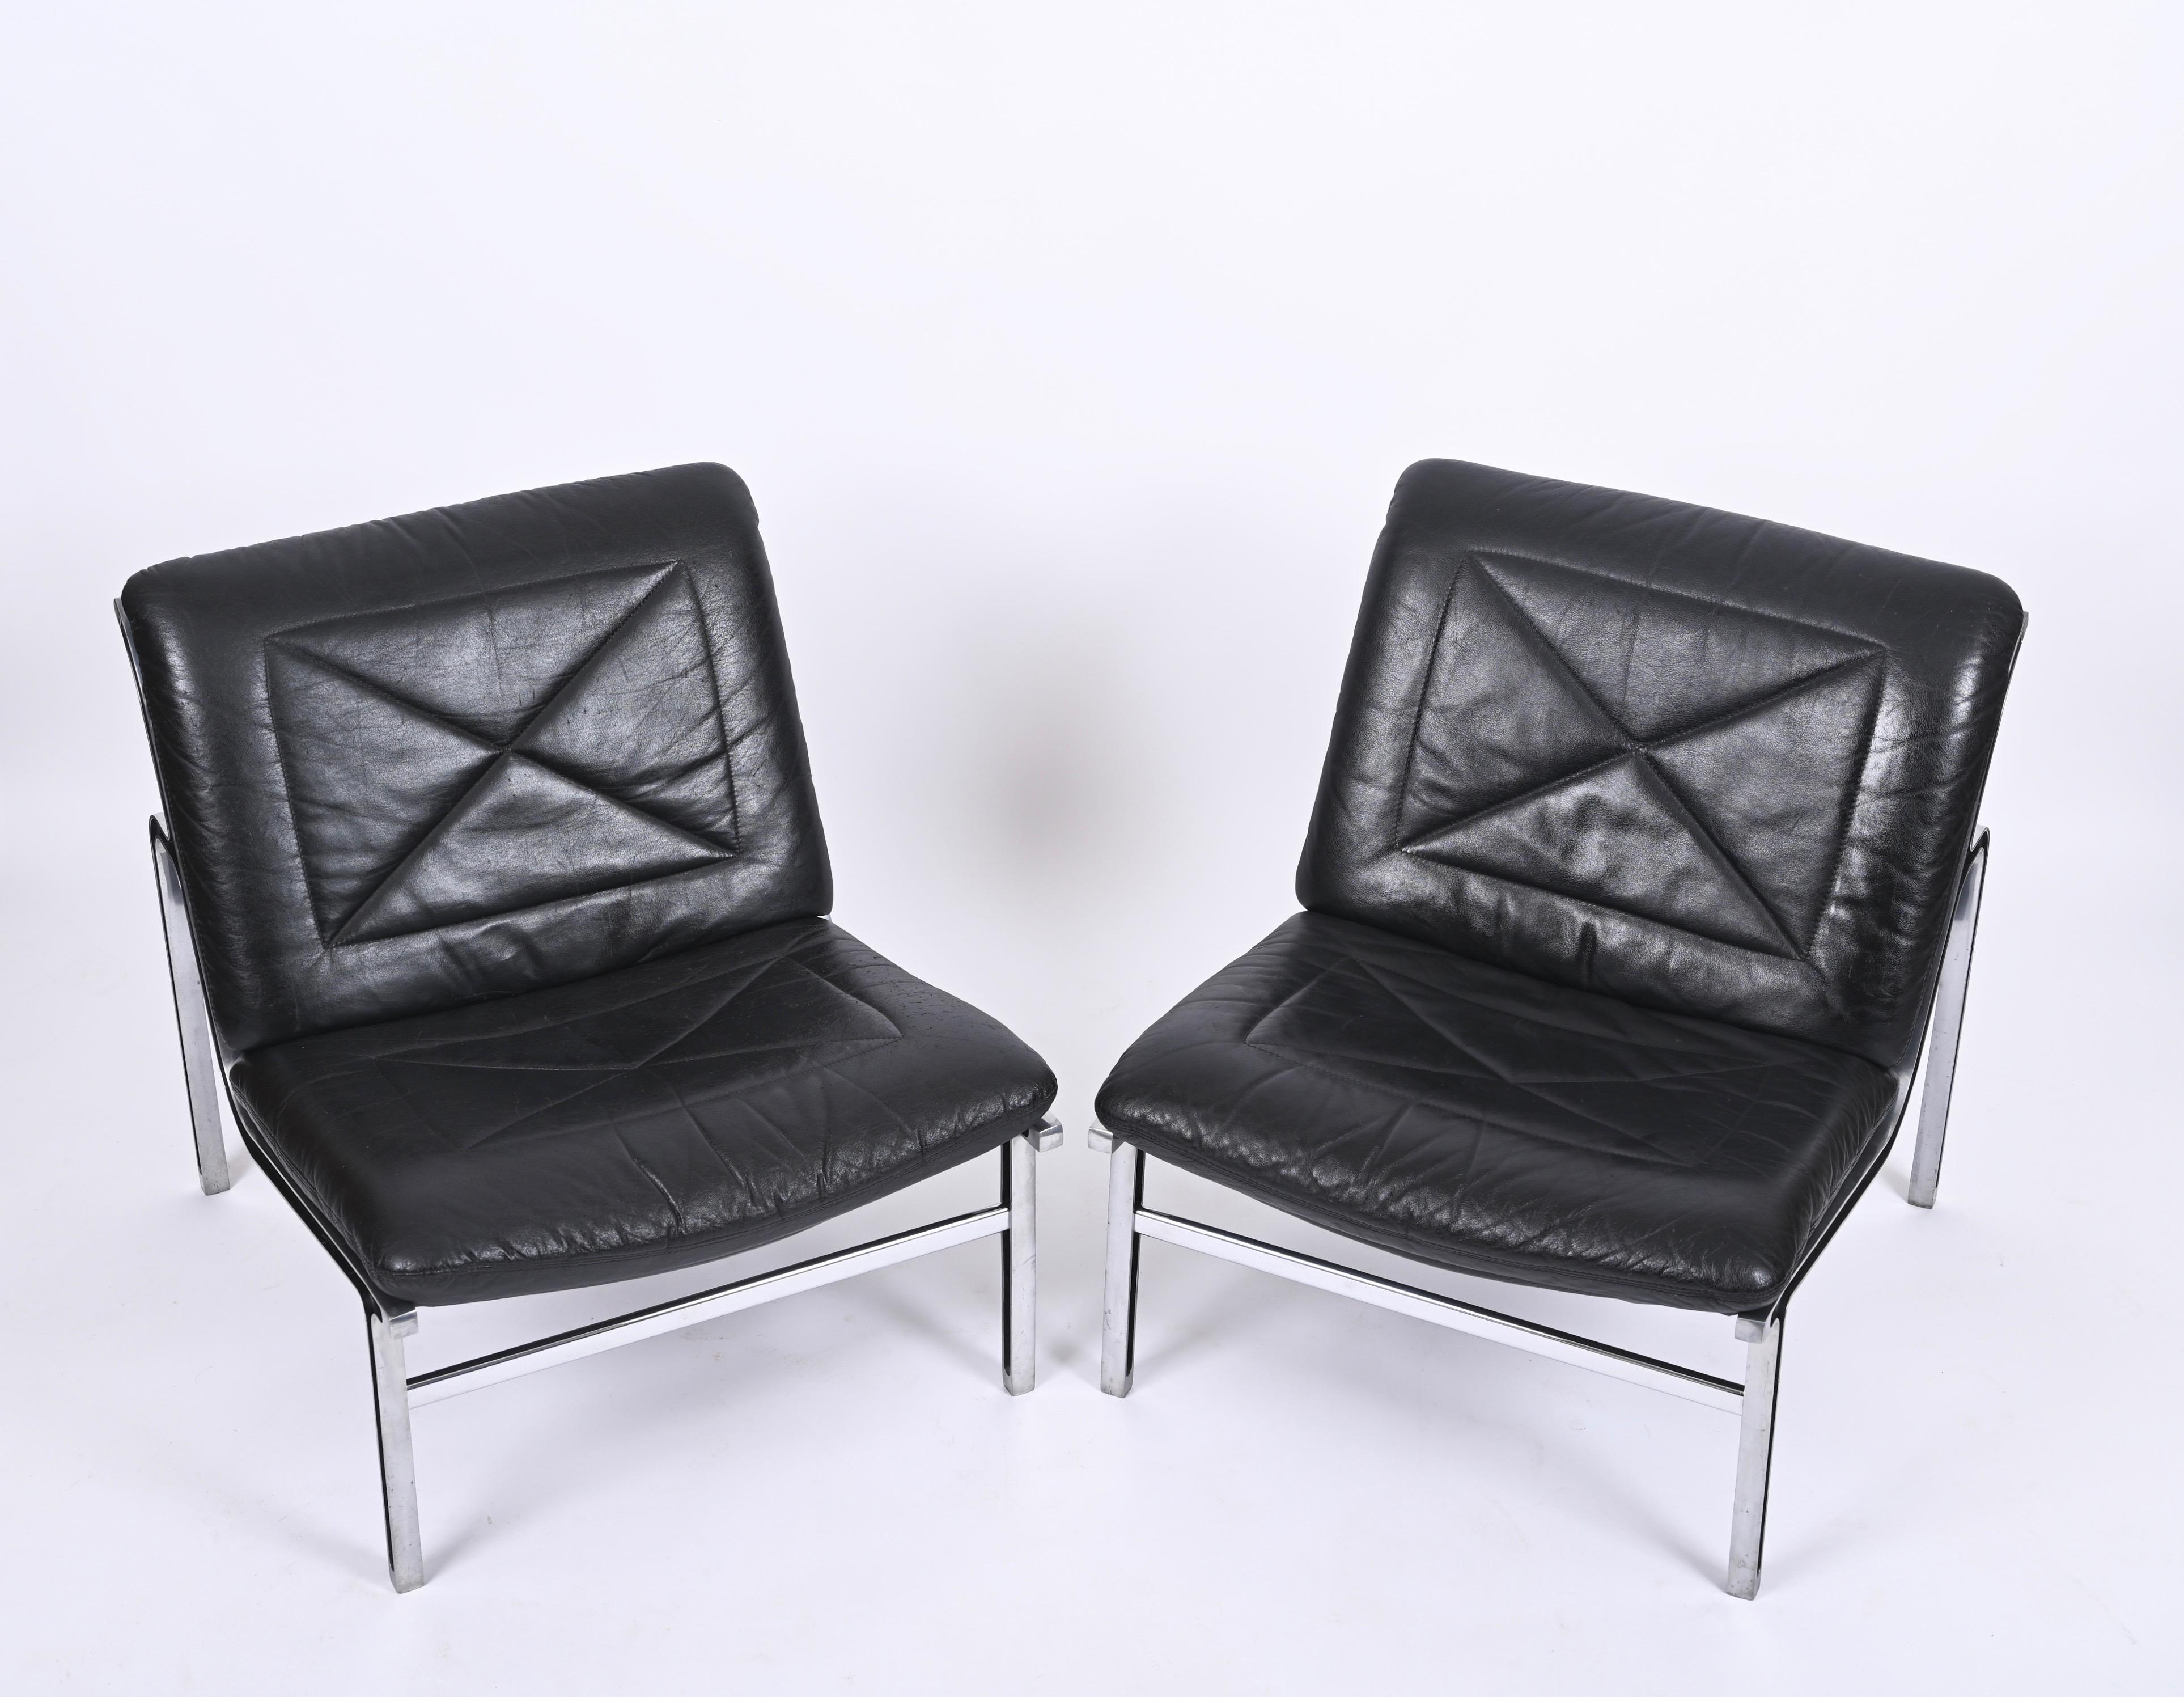 Andre Vandenbeuck Pair of 'Aluline' Lounge Chairs in Black Leather, Swiss, 1960s For Sale 9